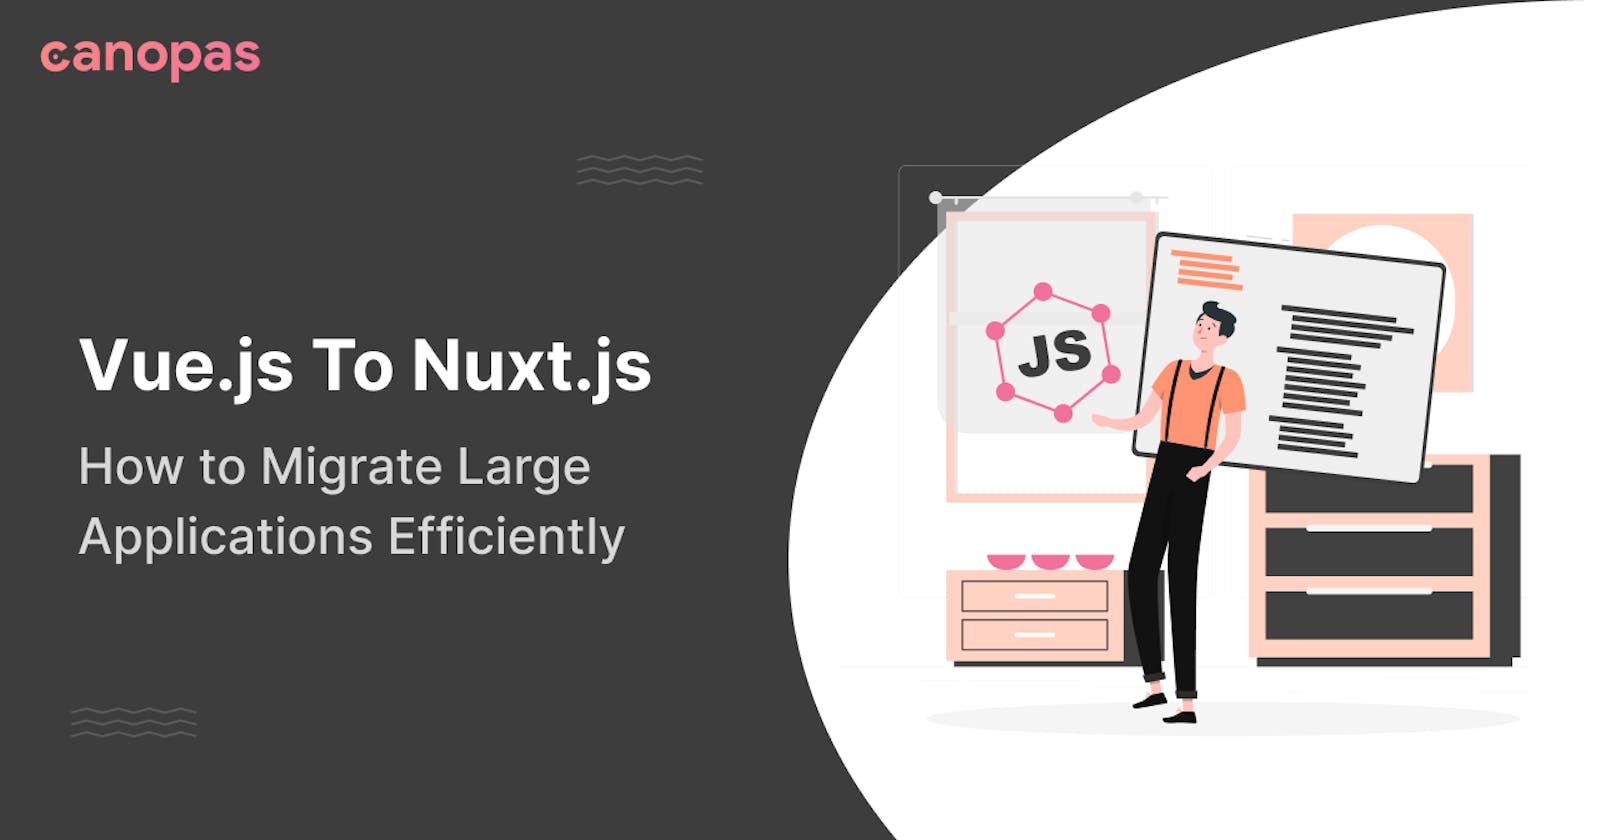 How to Migrate Large Applications Efficiently from Vue.js To Nuxt.js